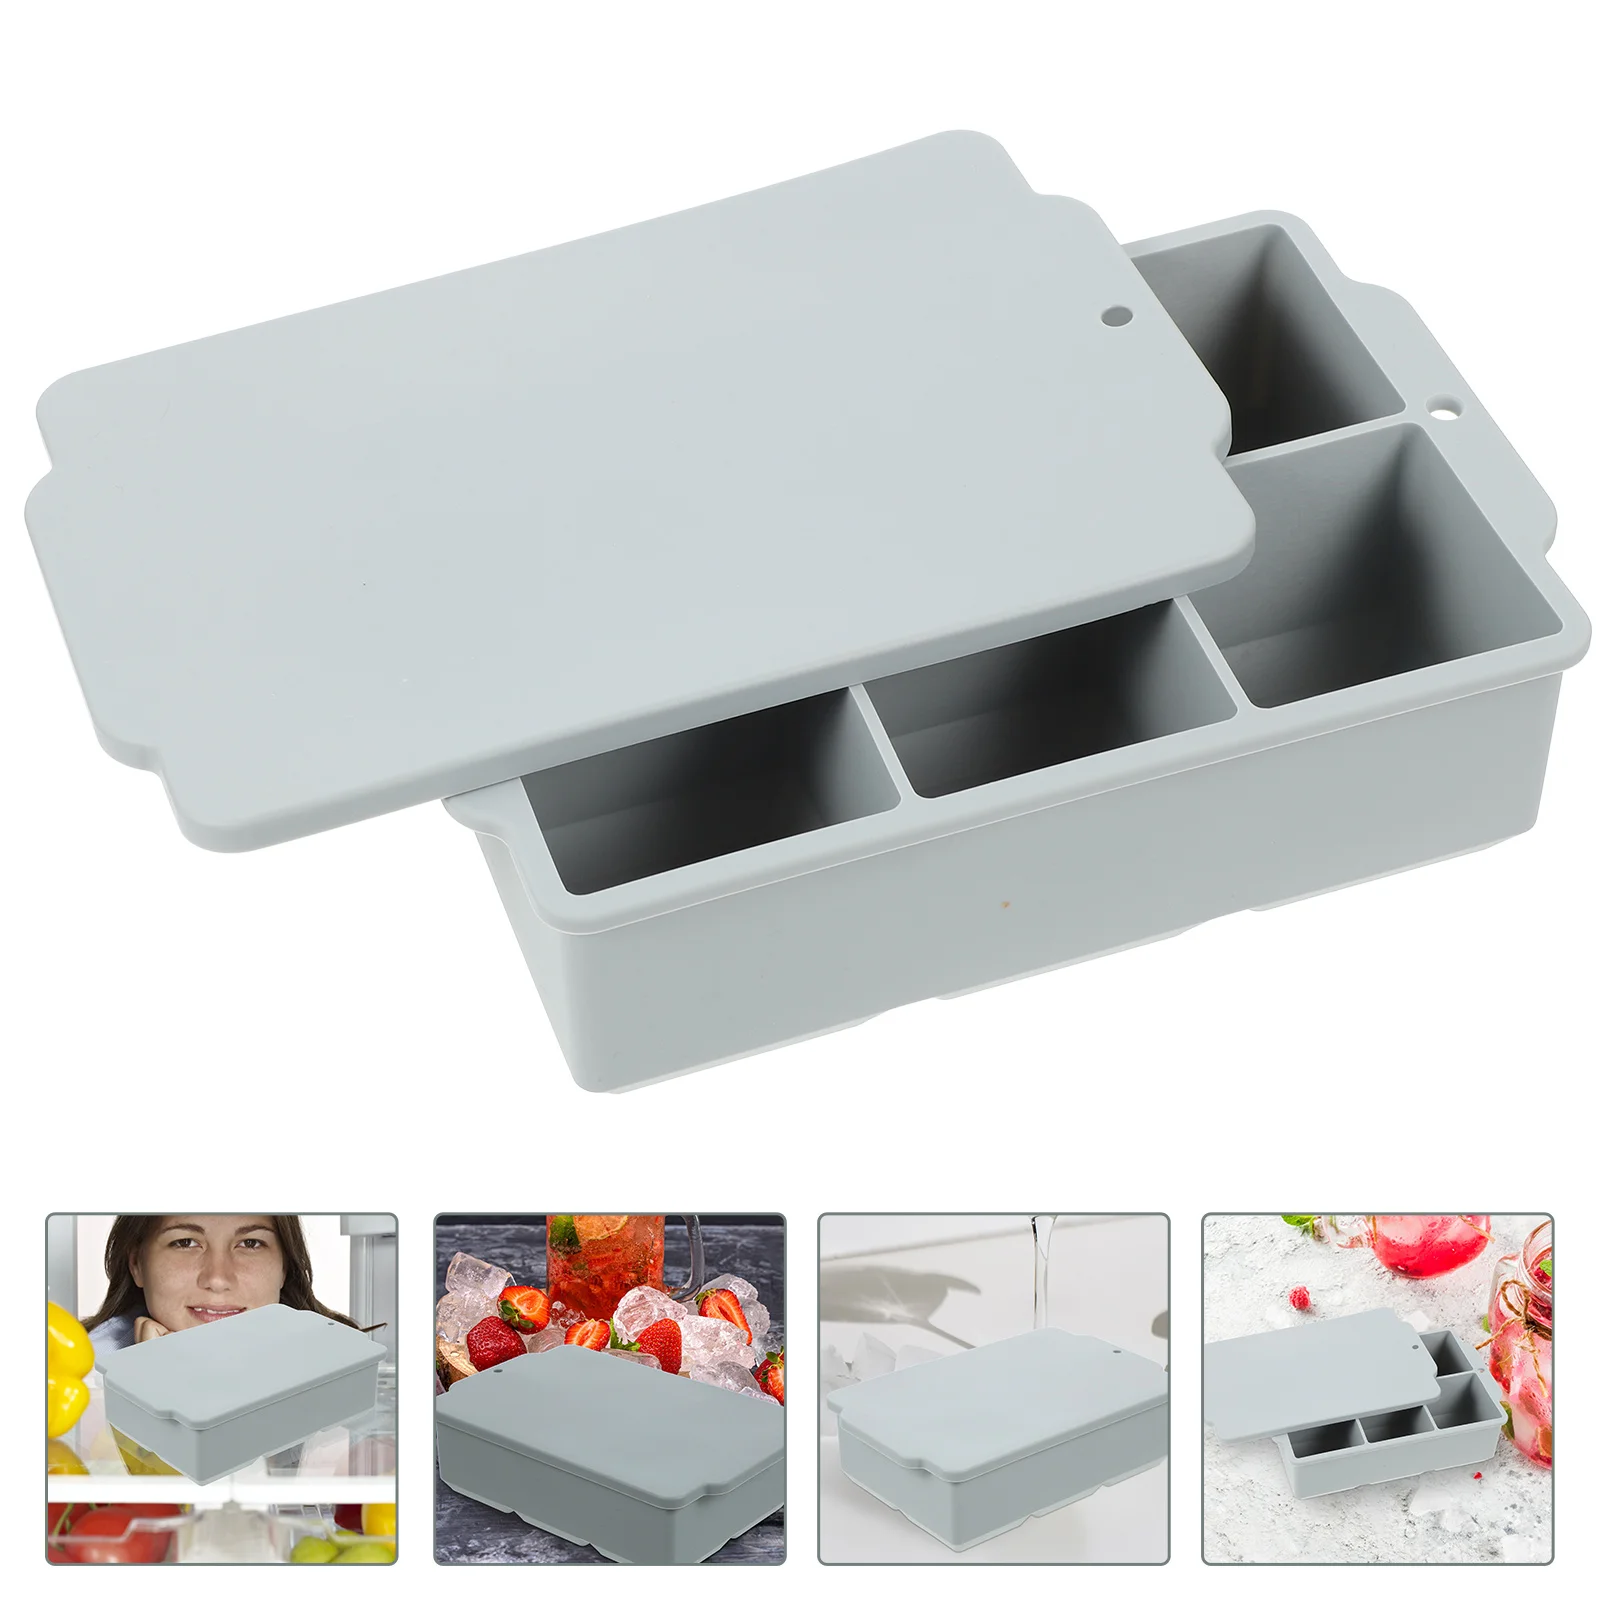 

Silicone Ice Tray Mold Cube Making Kitchen Trays Household Square Serving DIY Molds Refrigerator Box Grid Maker